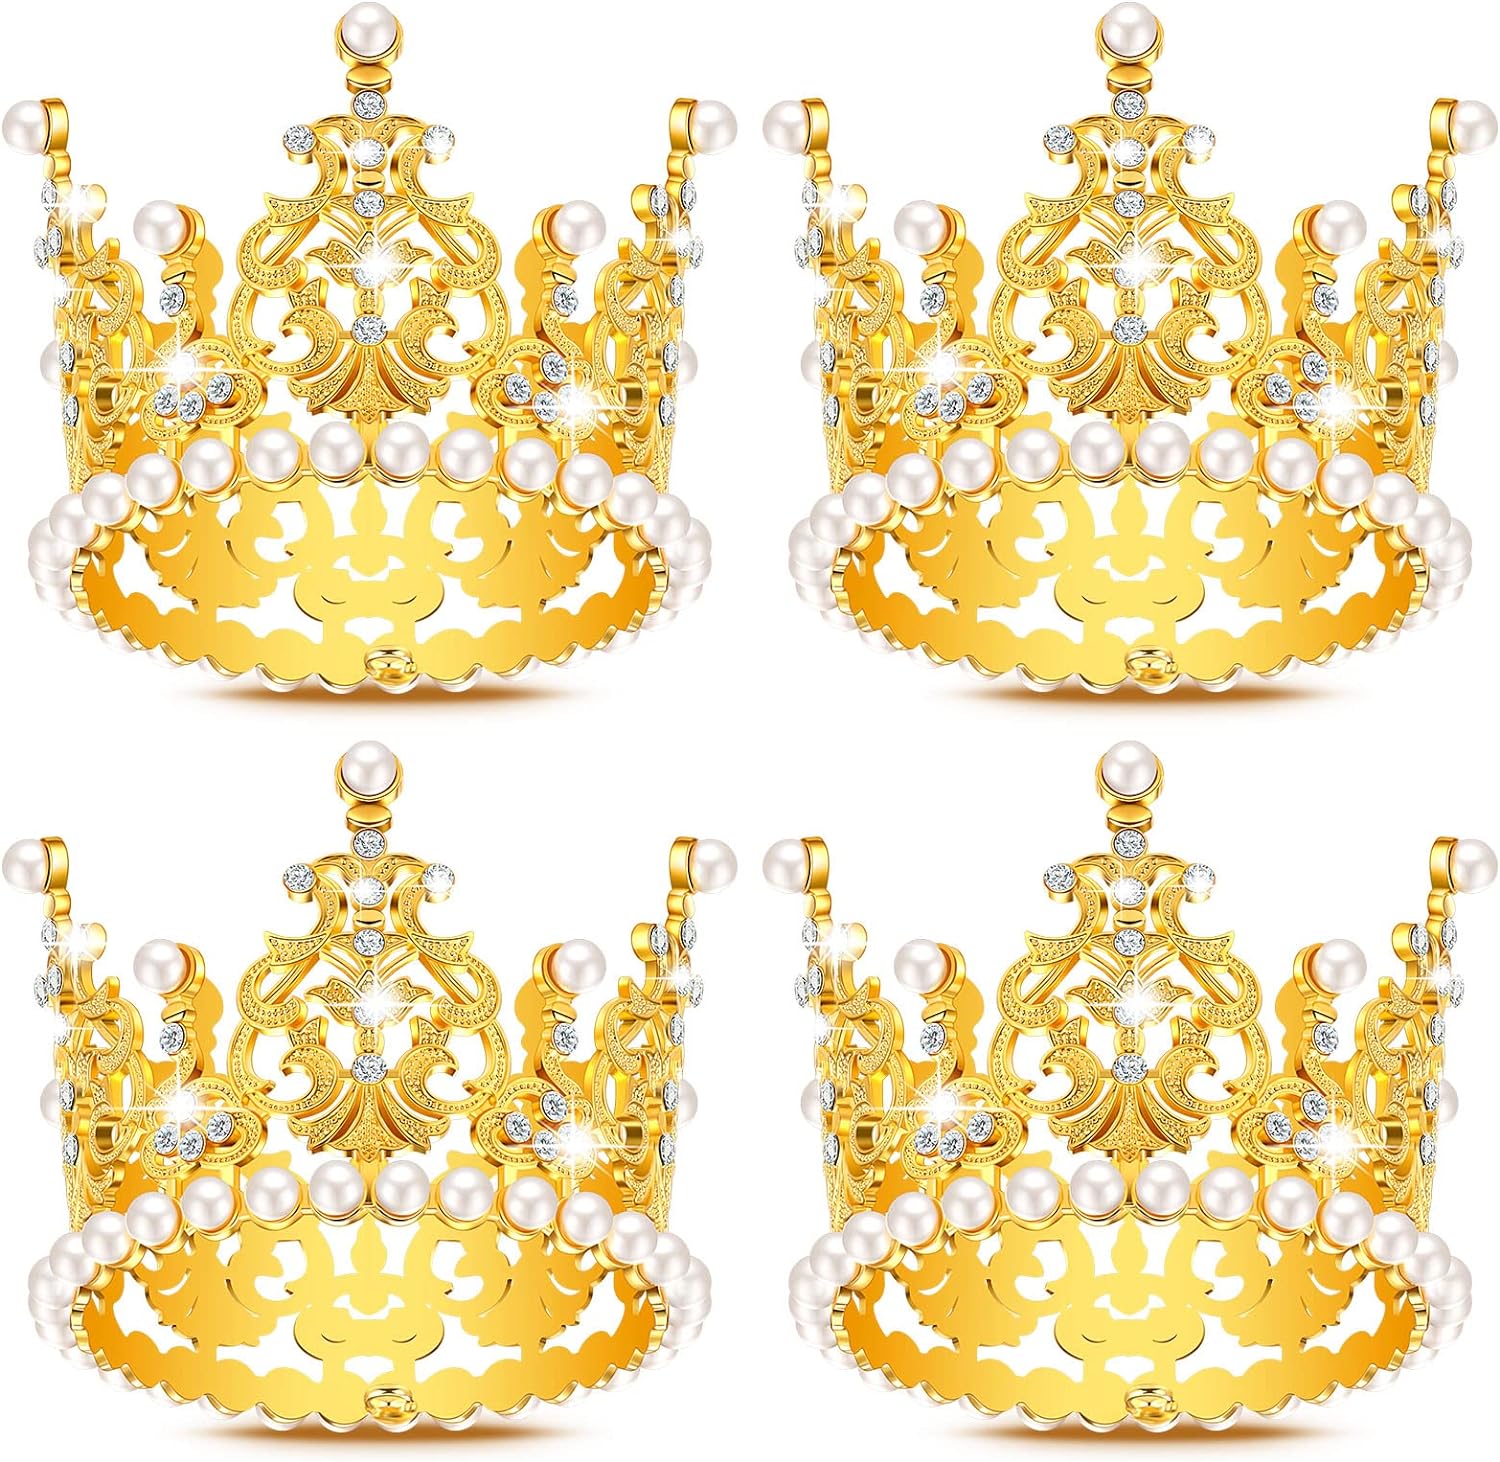 Gold (Medium) Crown for Bouquets -Pack of 12